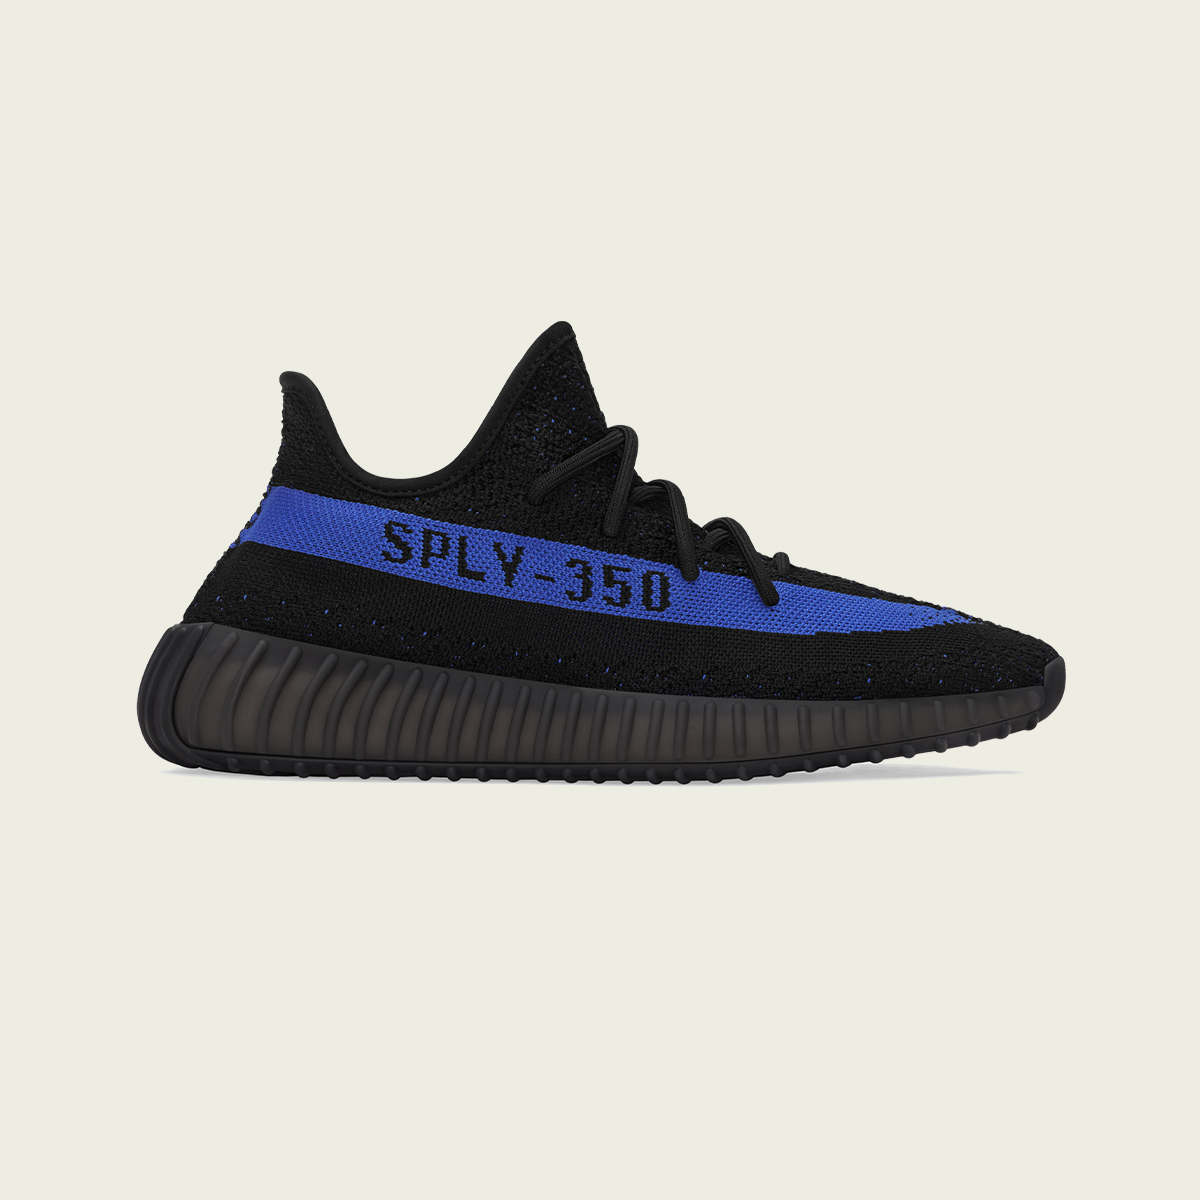 Foot Locker on Twitter: "#YEEZY 350 V2 'DAZZLING BLUE' LAUNCHES FEBRUARY 26  IN MENS AND KIDS SIZES. https://t.co/yMut9o9yj4" / Twitter